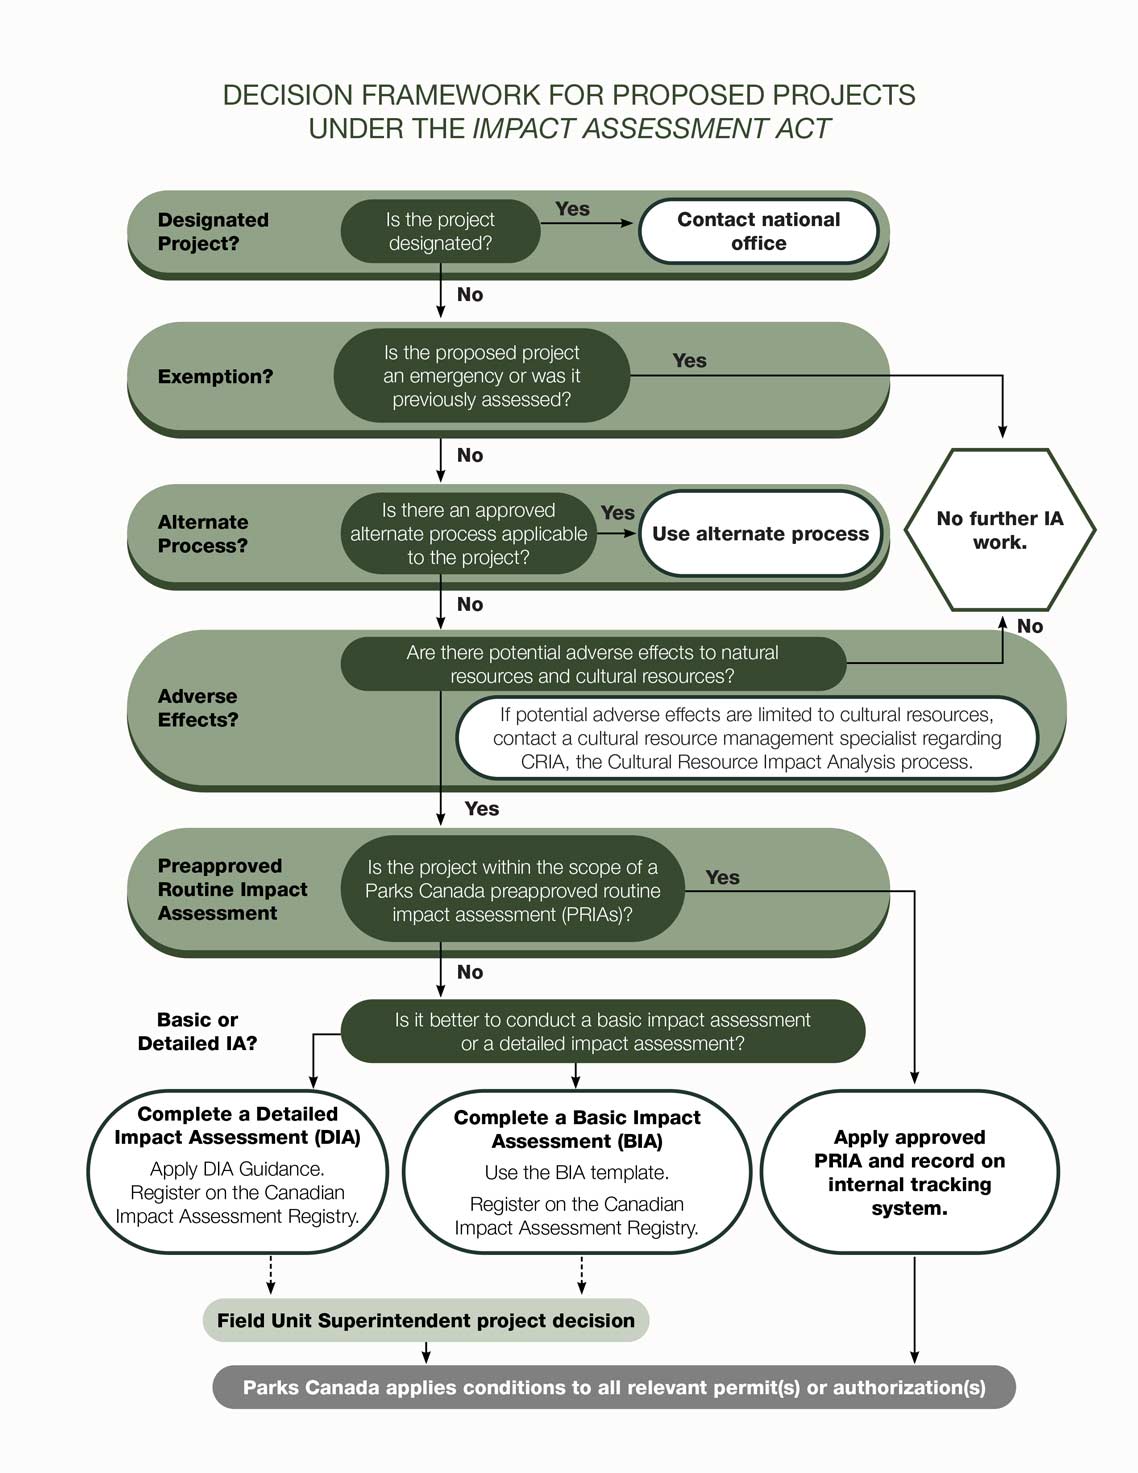 Decision framework for proposed projects under the Impact Assessment Act